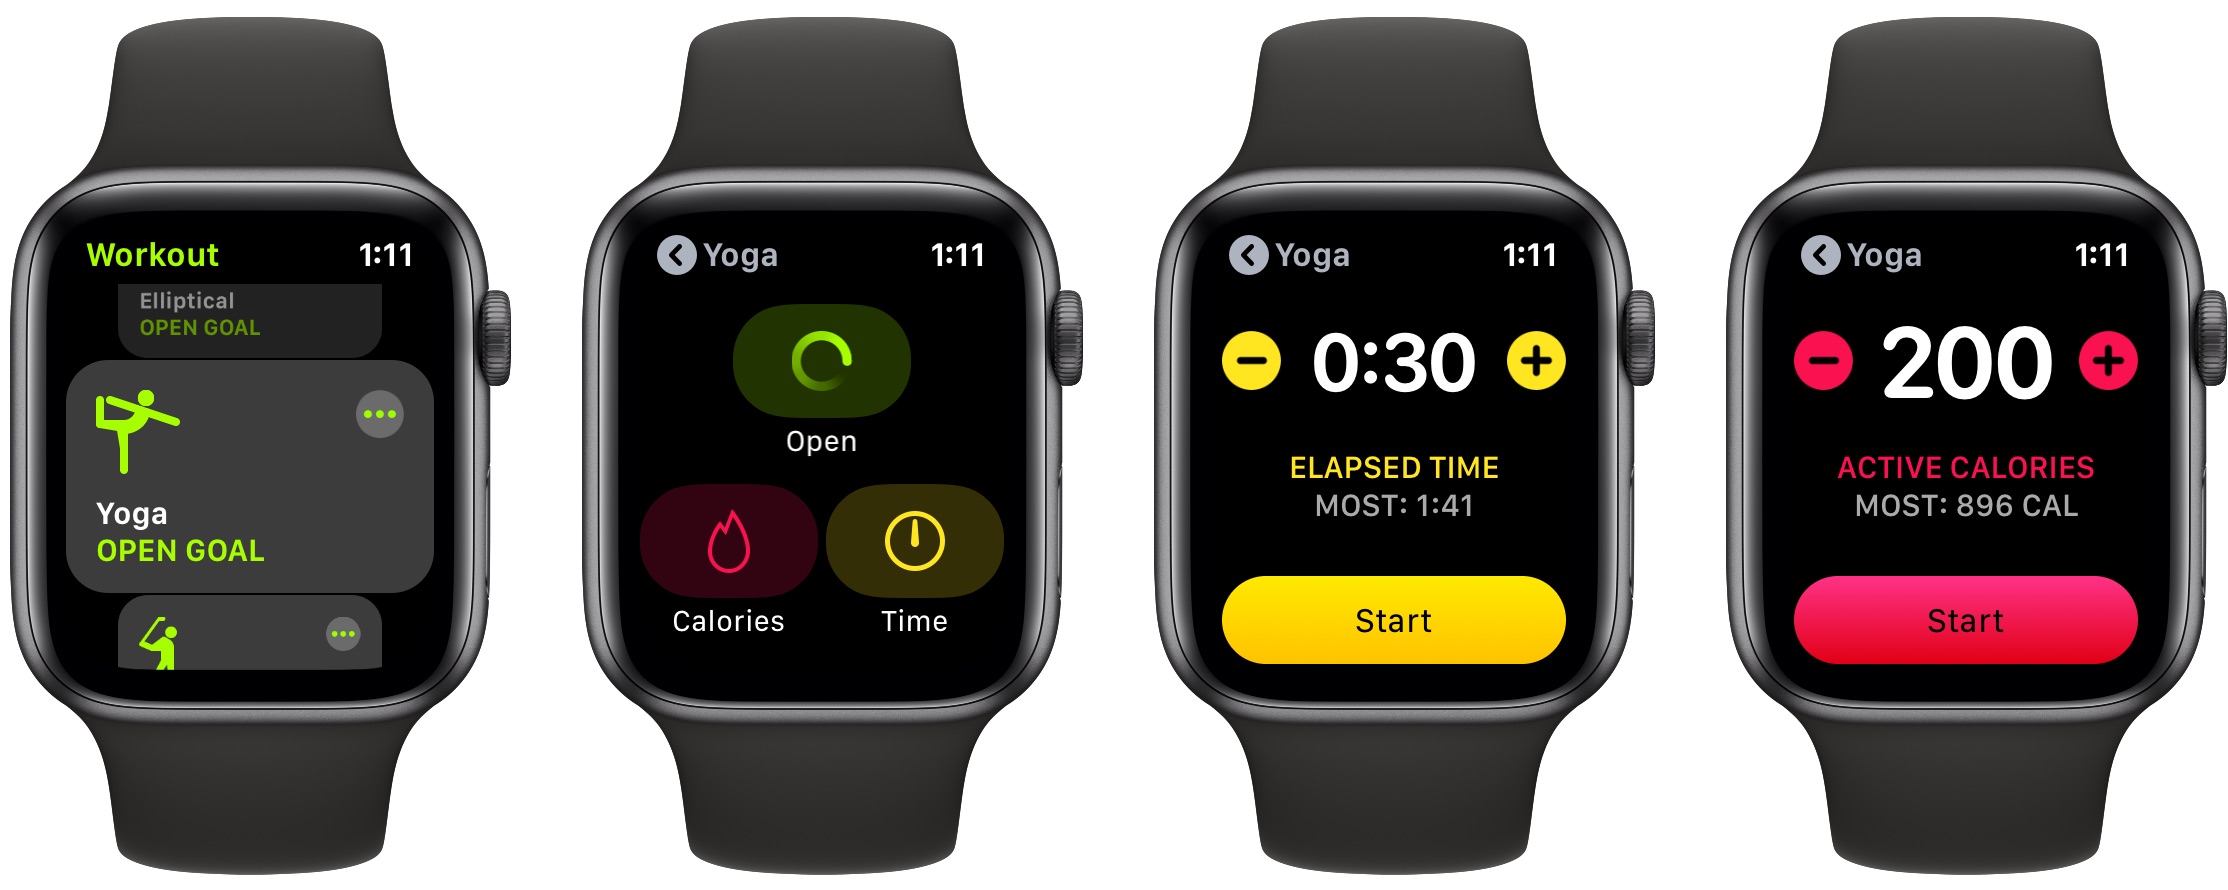 How To Use The Yoga App On The Apple Watch To Track Your Practice